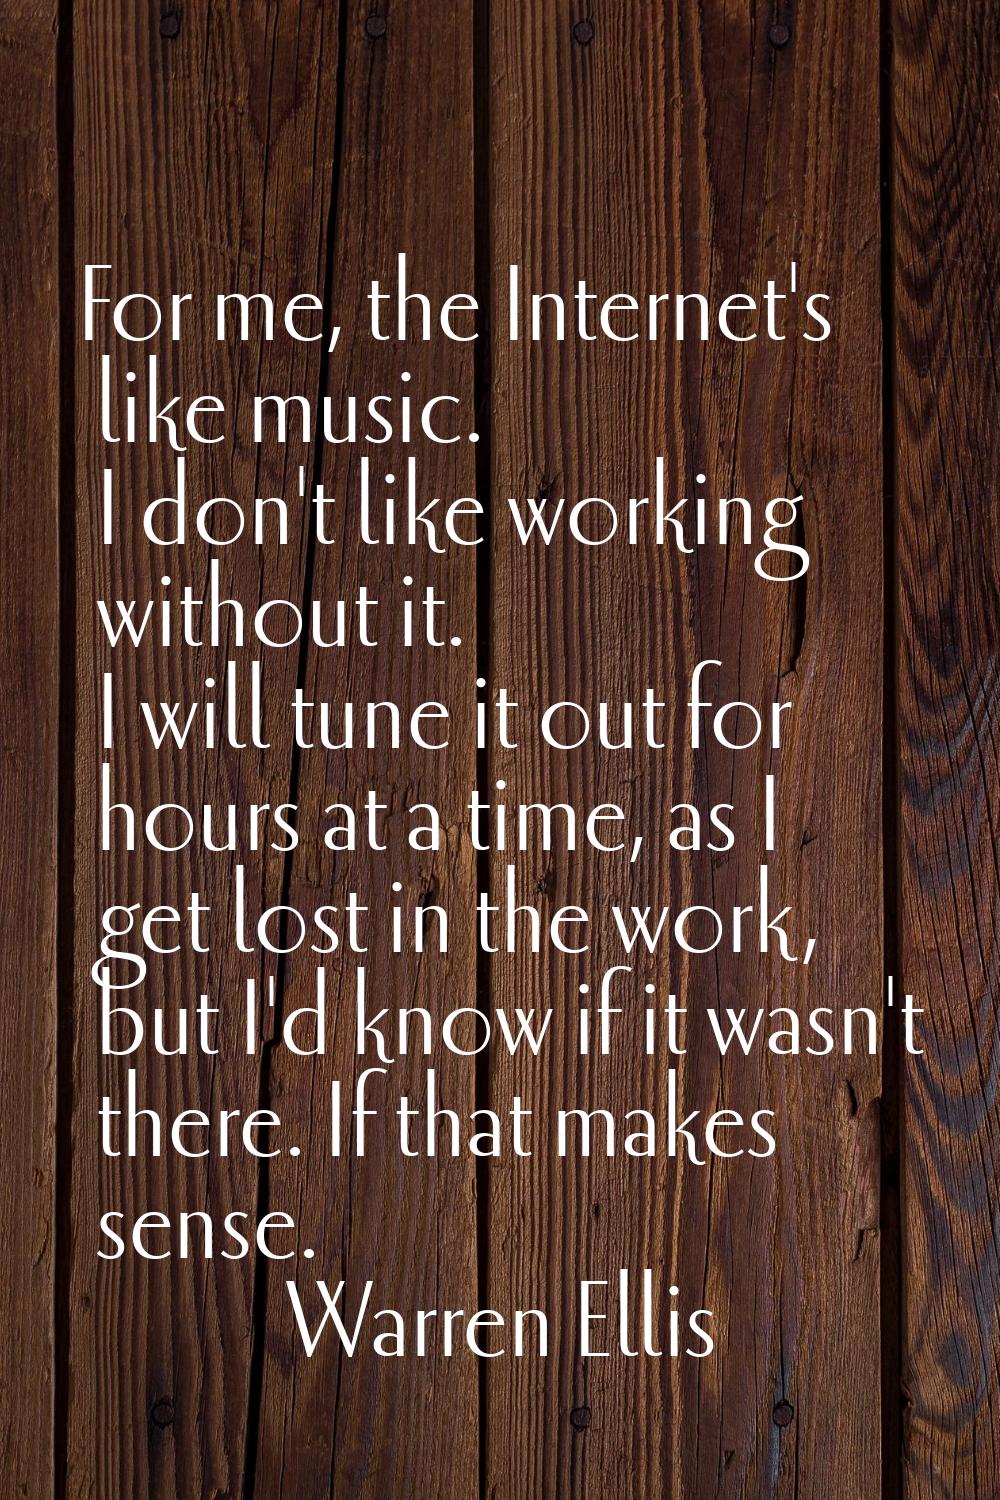 For me, the Internet's like music. I don't like working without it. I will tune it out for hours at